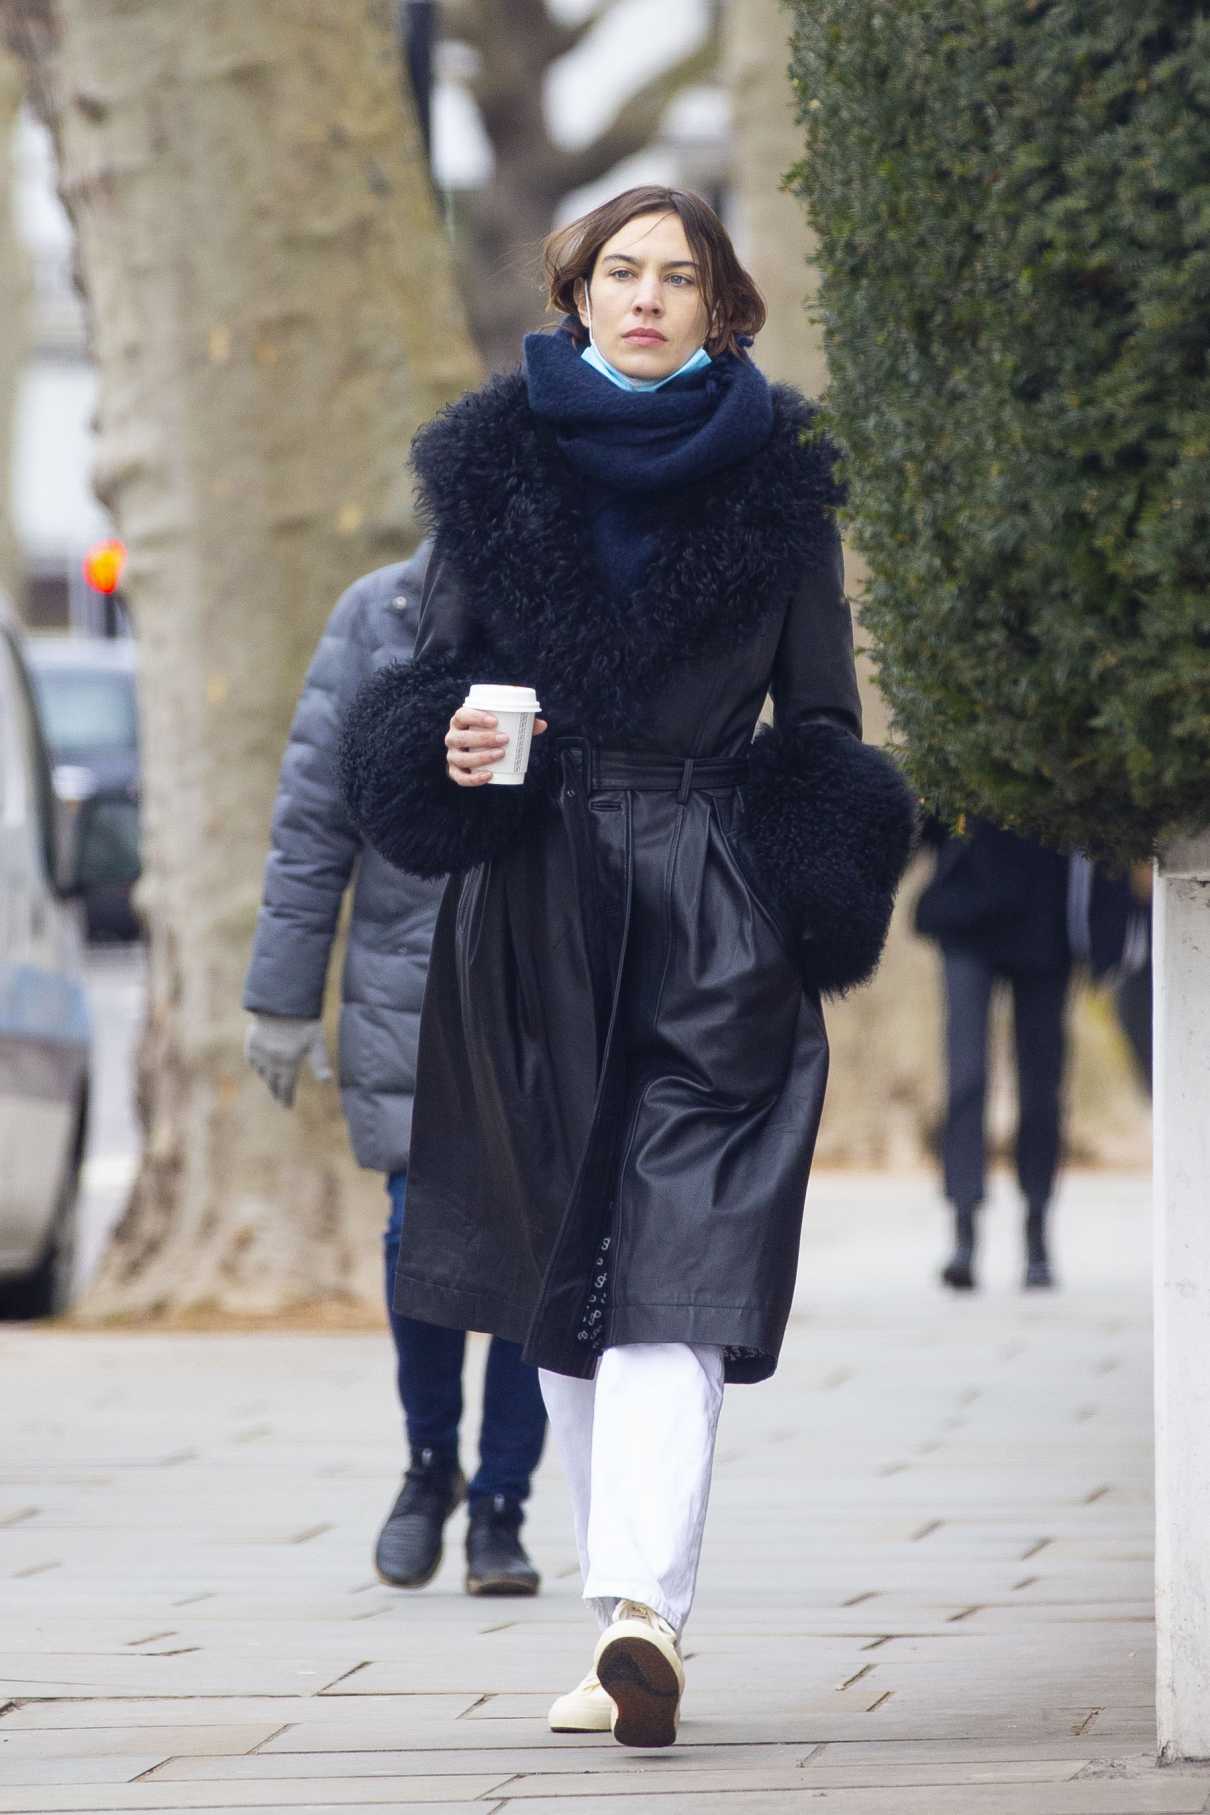 Alexa Chung in a Black Coat Was Seen Out with Boyfriend Orson Fry in ...